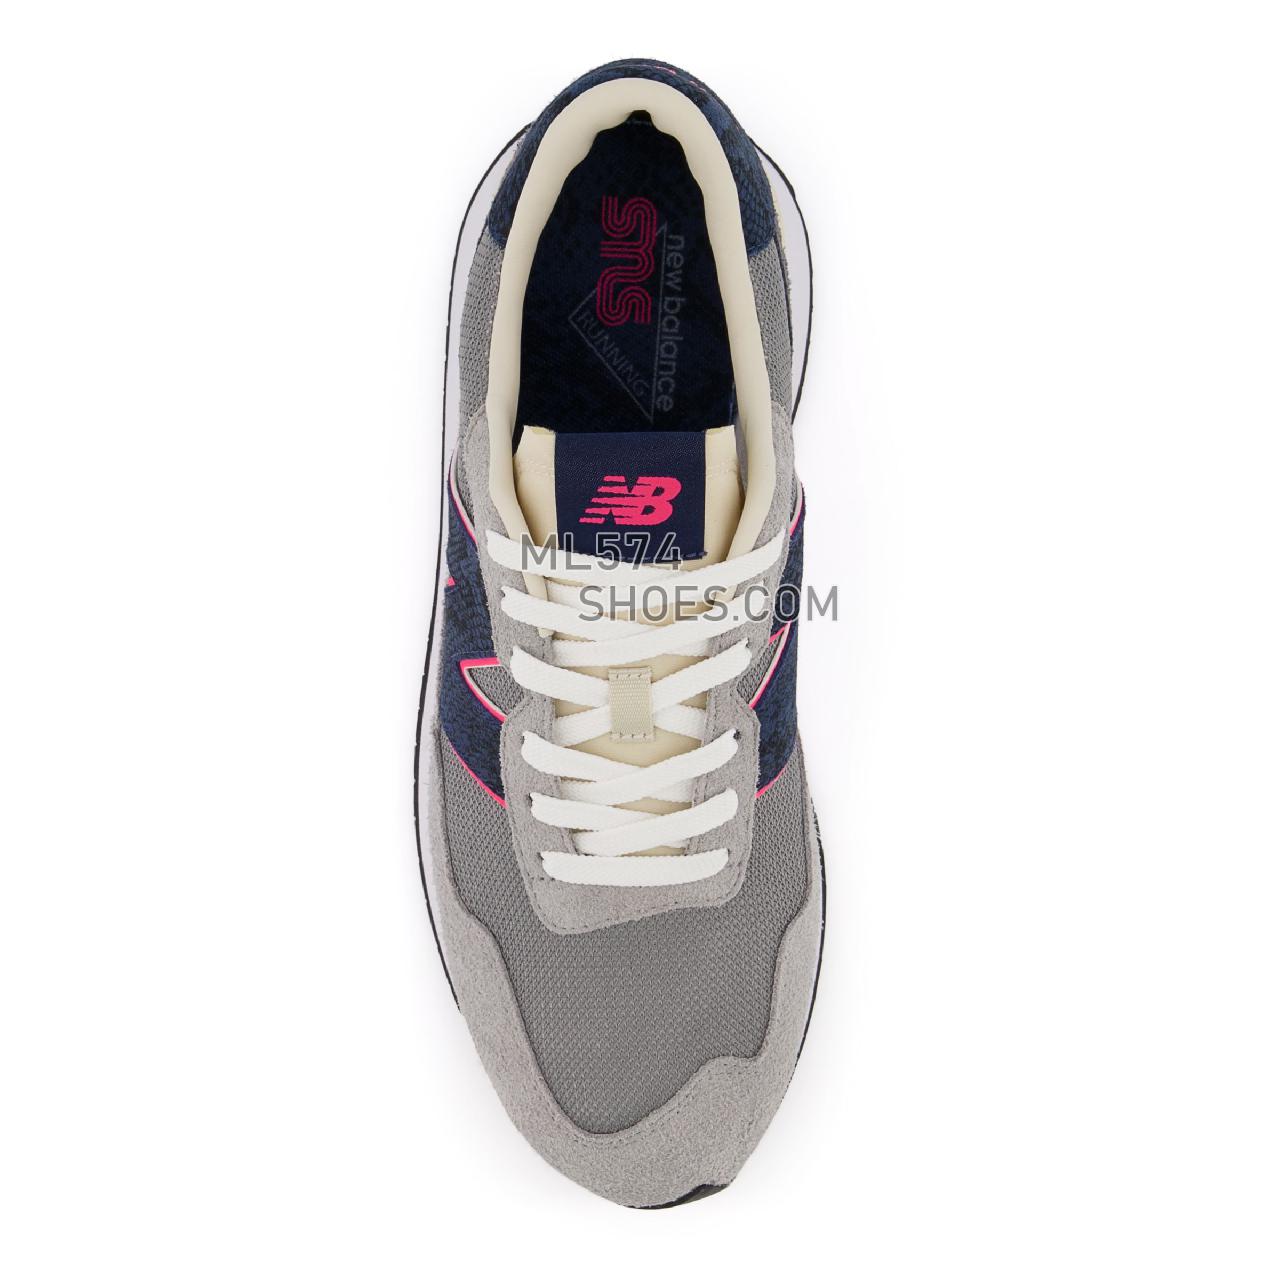 New Balance SNS 237 - Men's Classic Sneakers - Navy with Grey - MS237NS